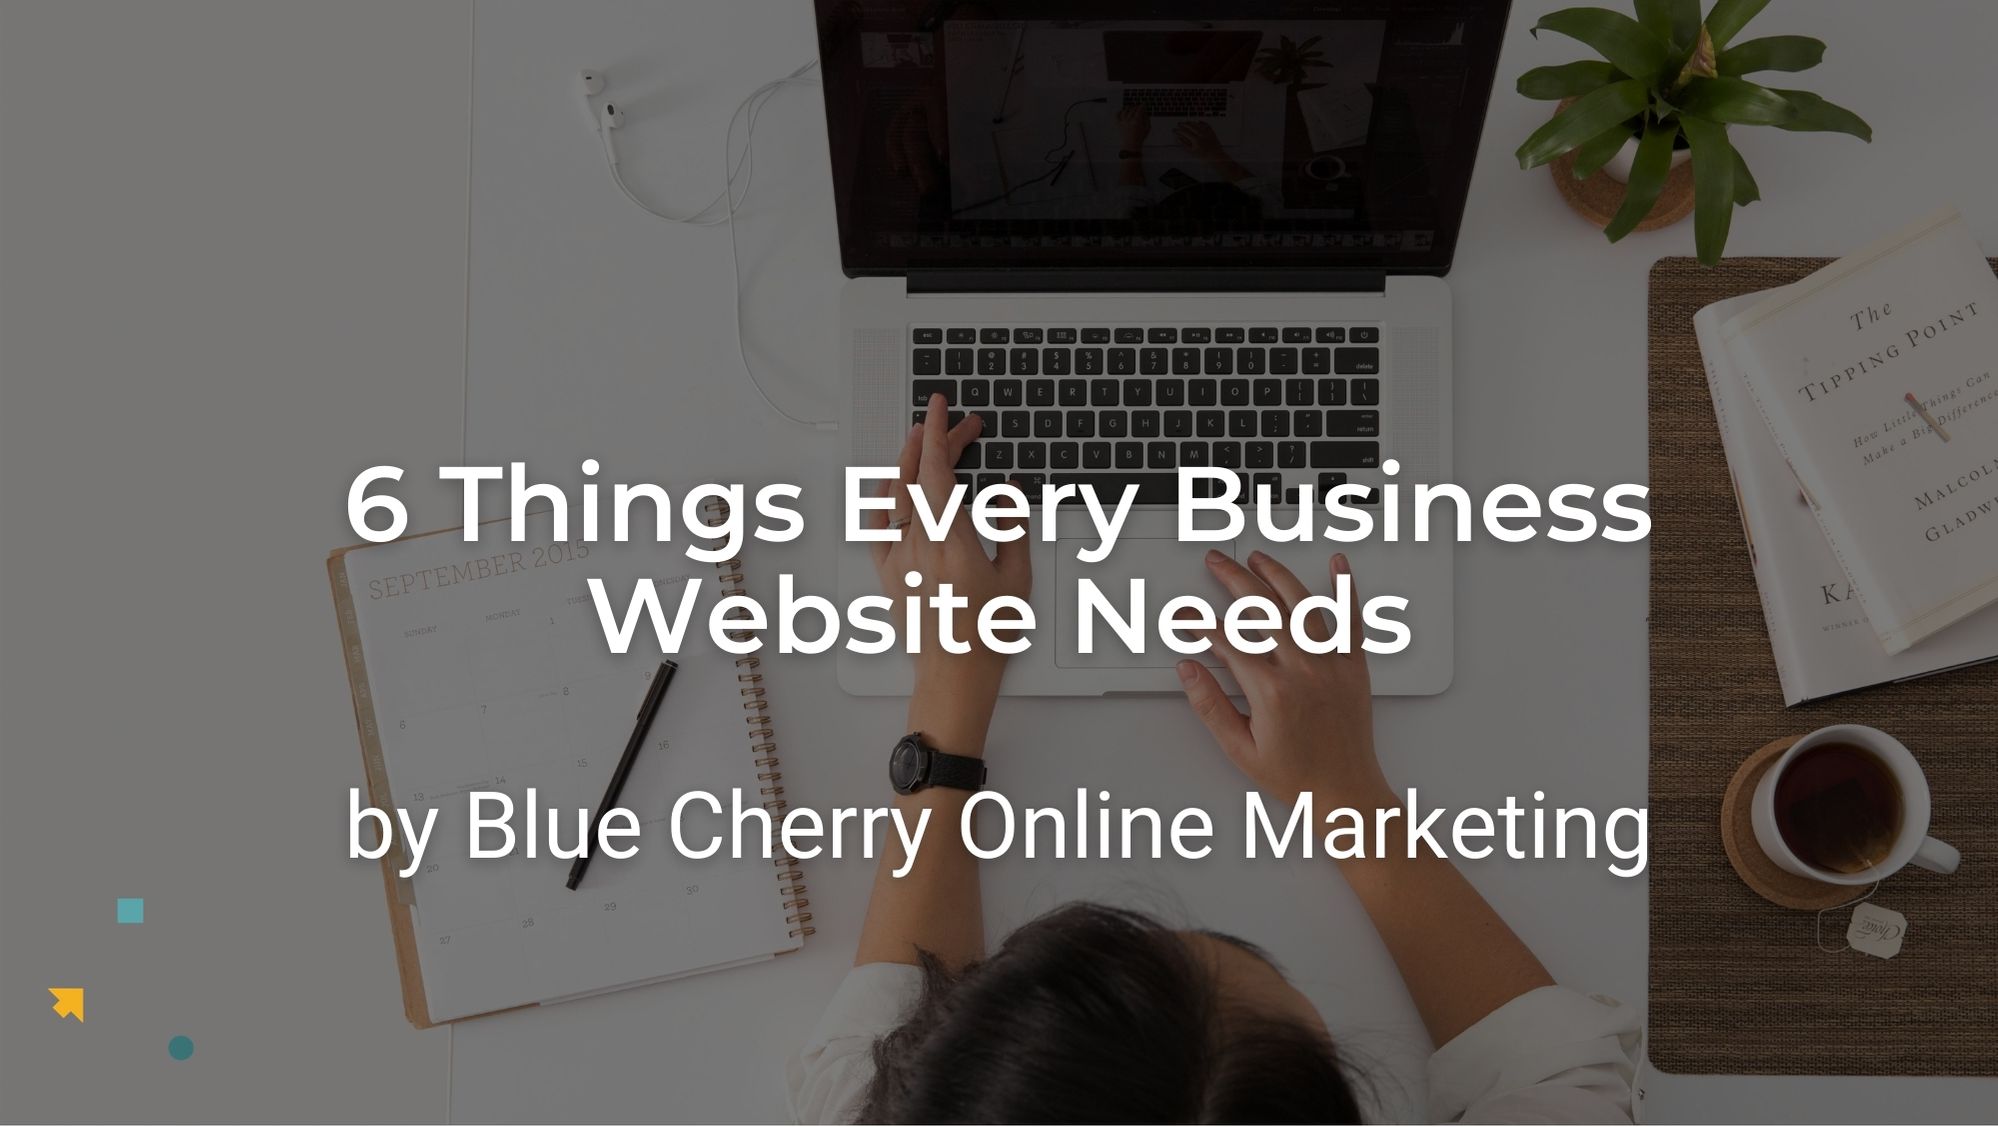 6 Things every business website needs